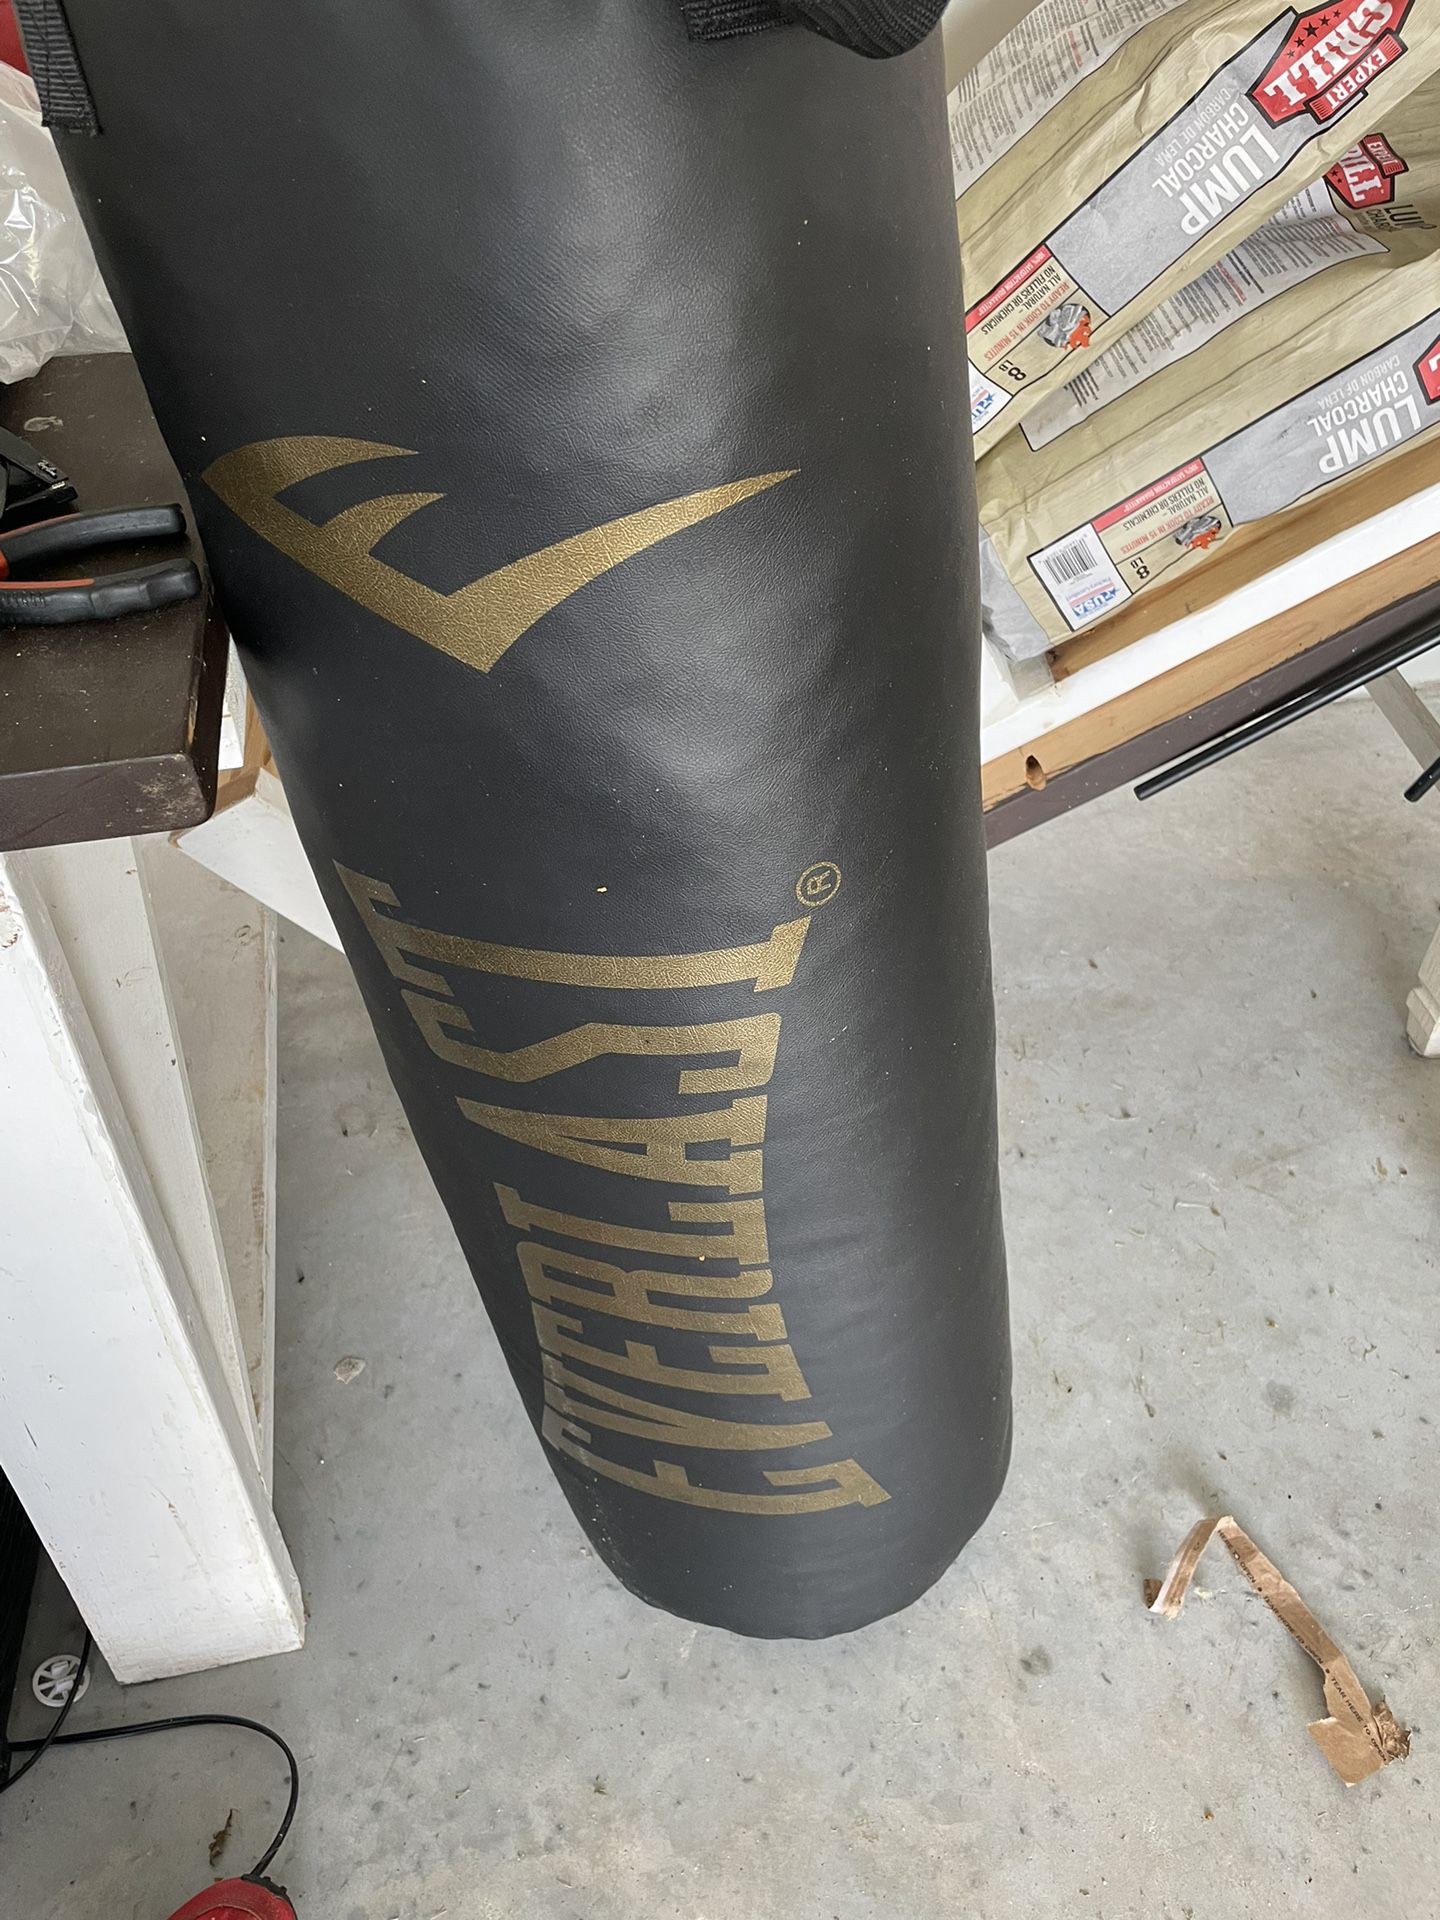 Everlast Punching Bag With Speed AH